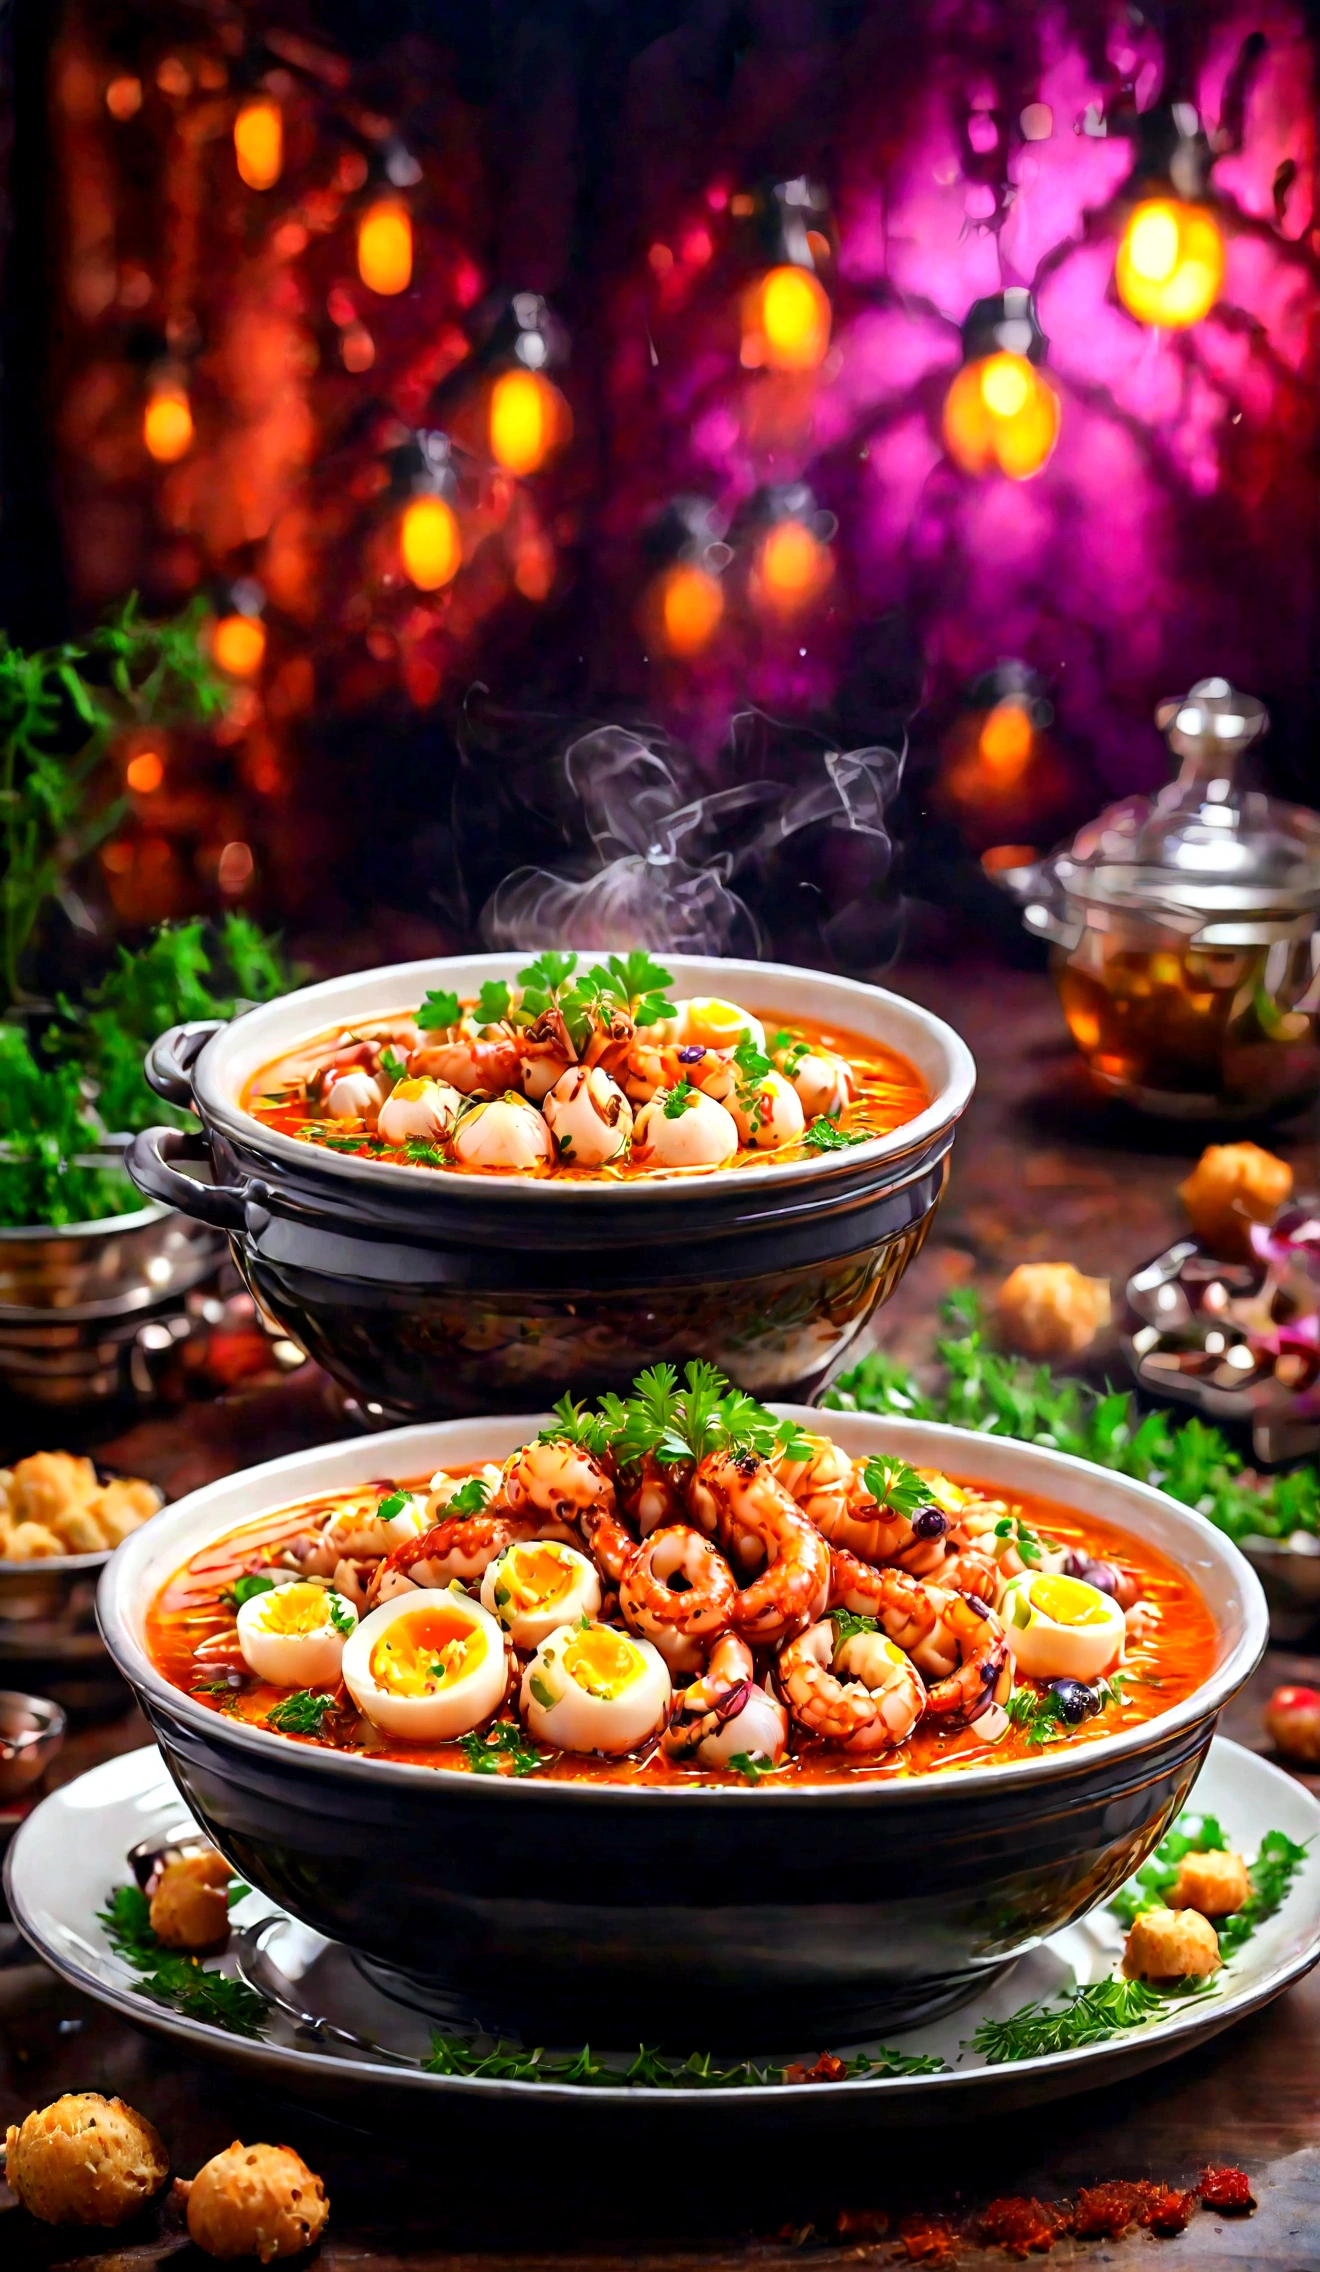 a plate of very tasty-looking soup with large tentacles of octopus seasoned with stewed tomatoes, chunks of cheese and lemon. a table set for dinner, gold cutlery, a glass of champagne. A vase with ice and a bottle of wine.
